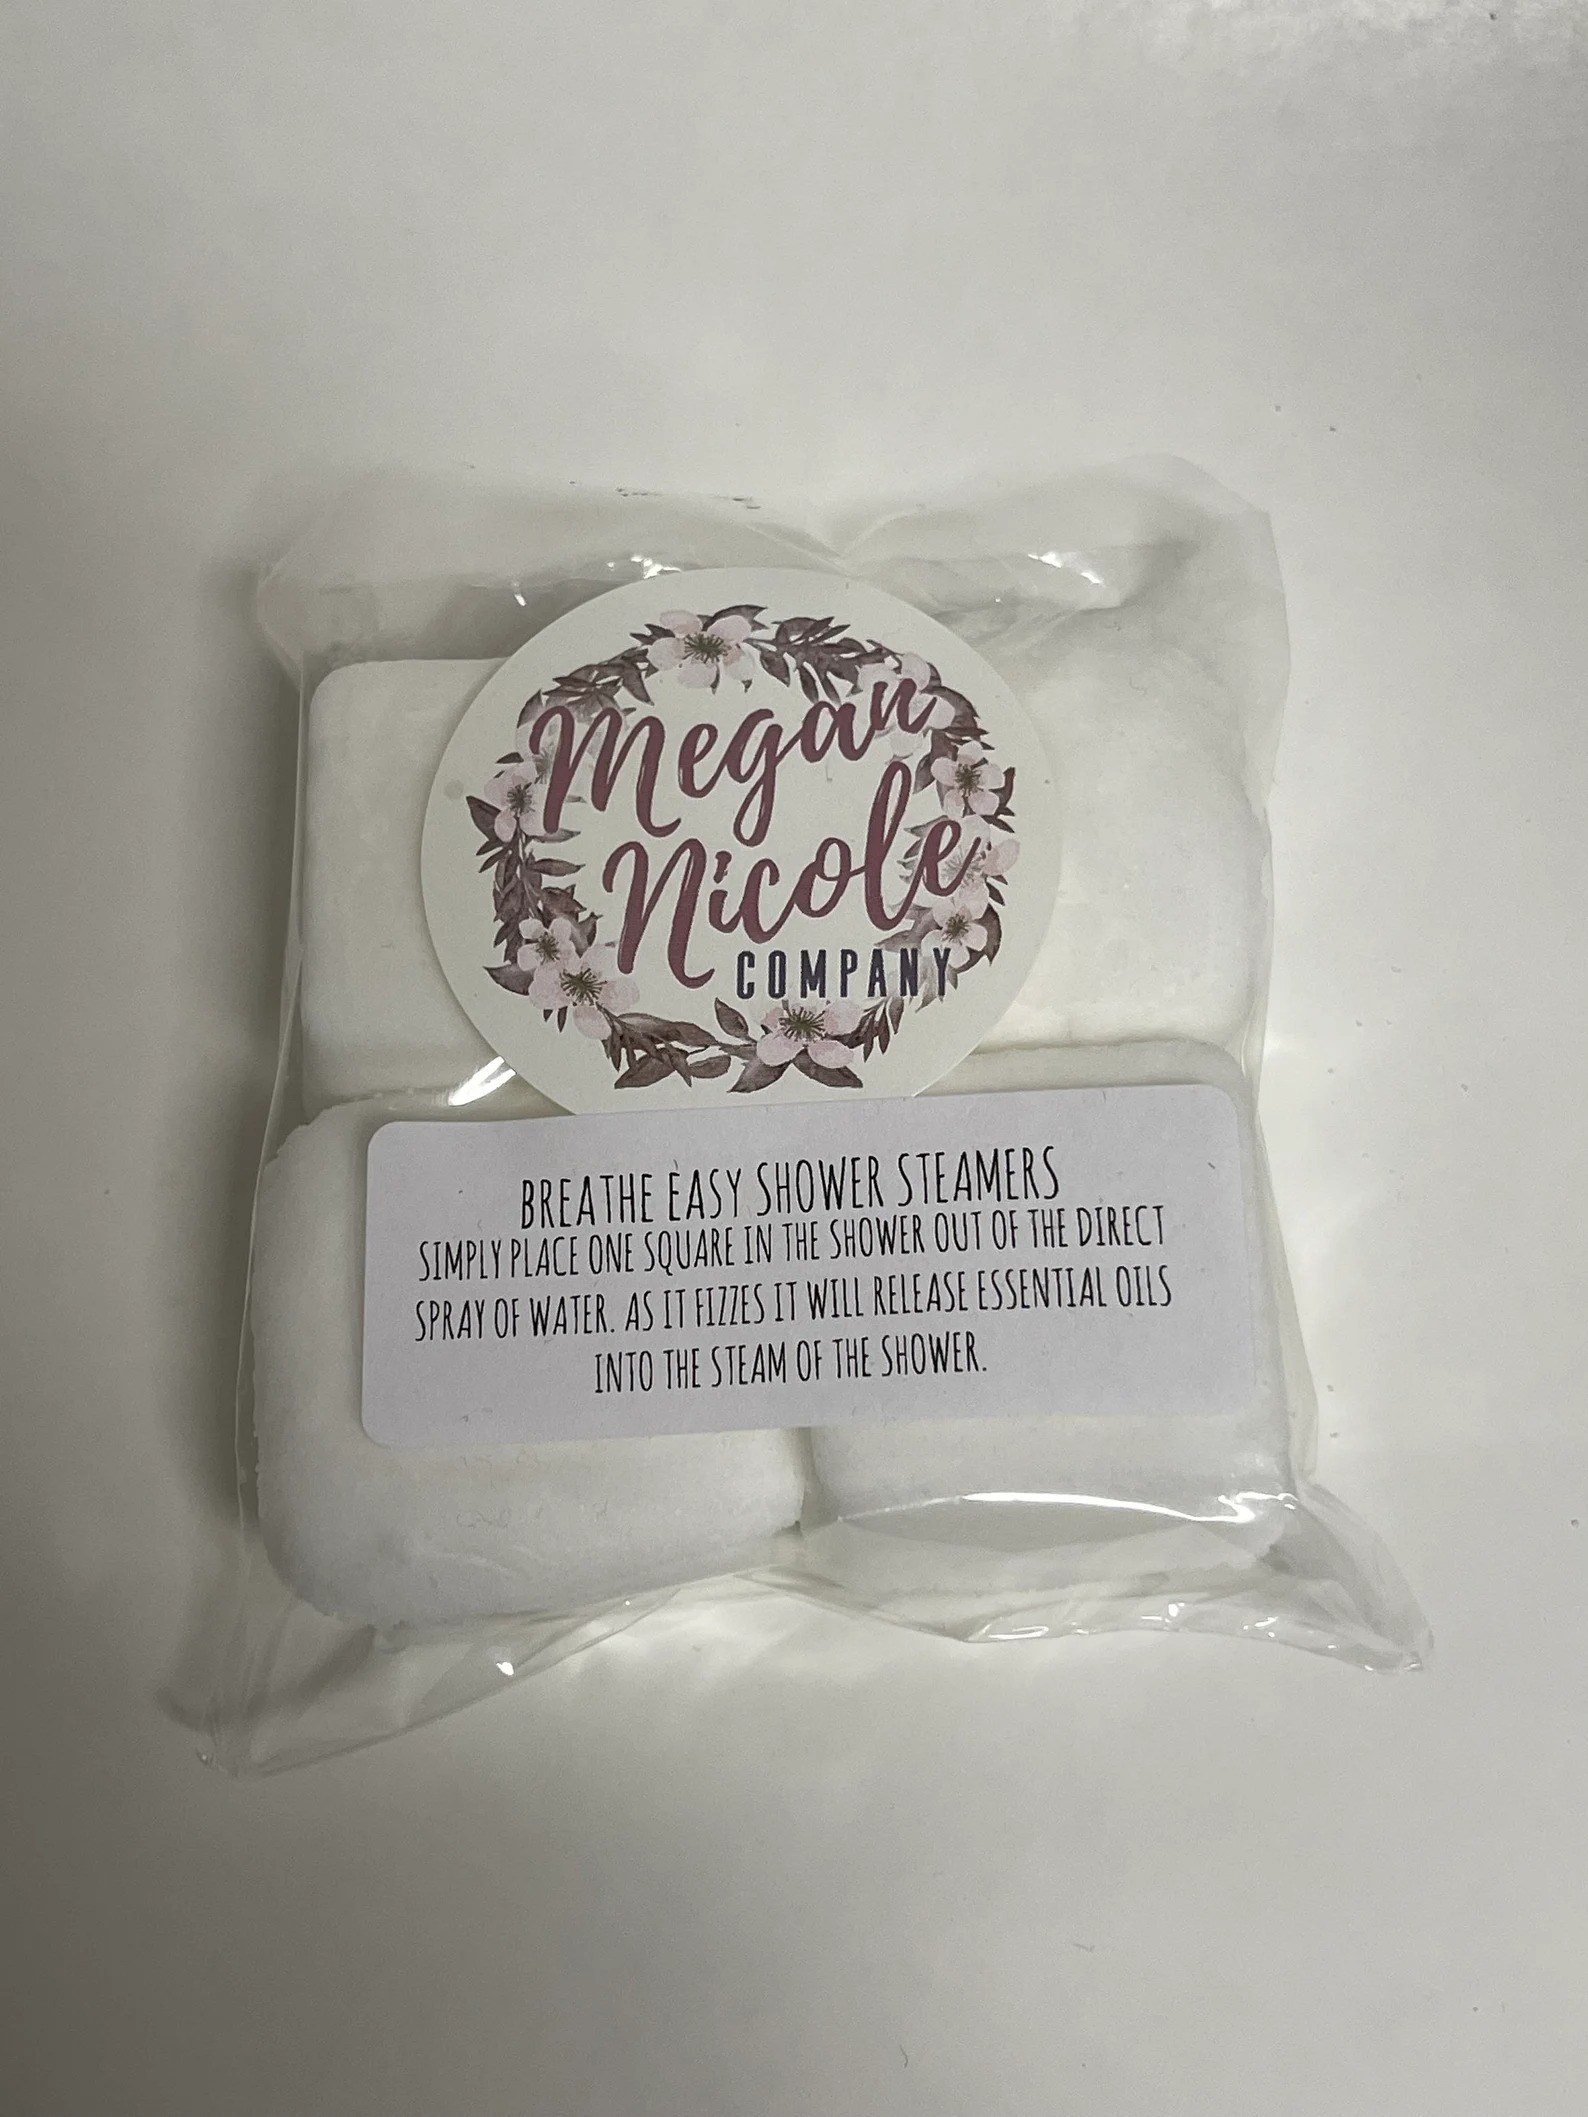 breathe easy shower steamers from megan nicole company